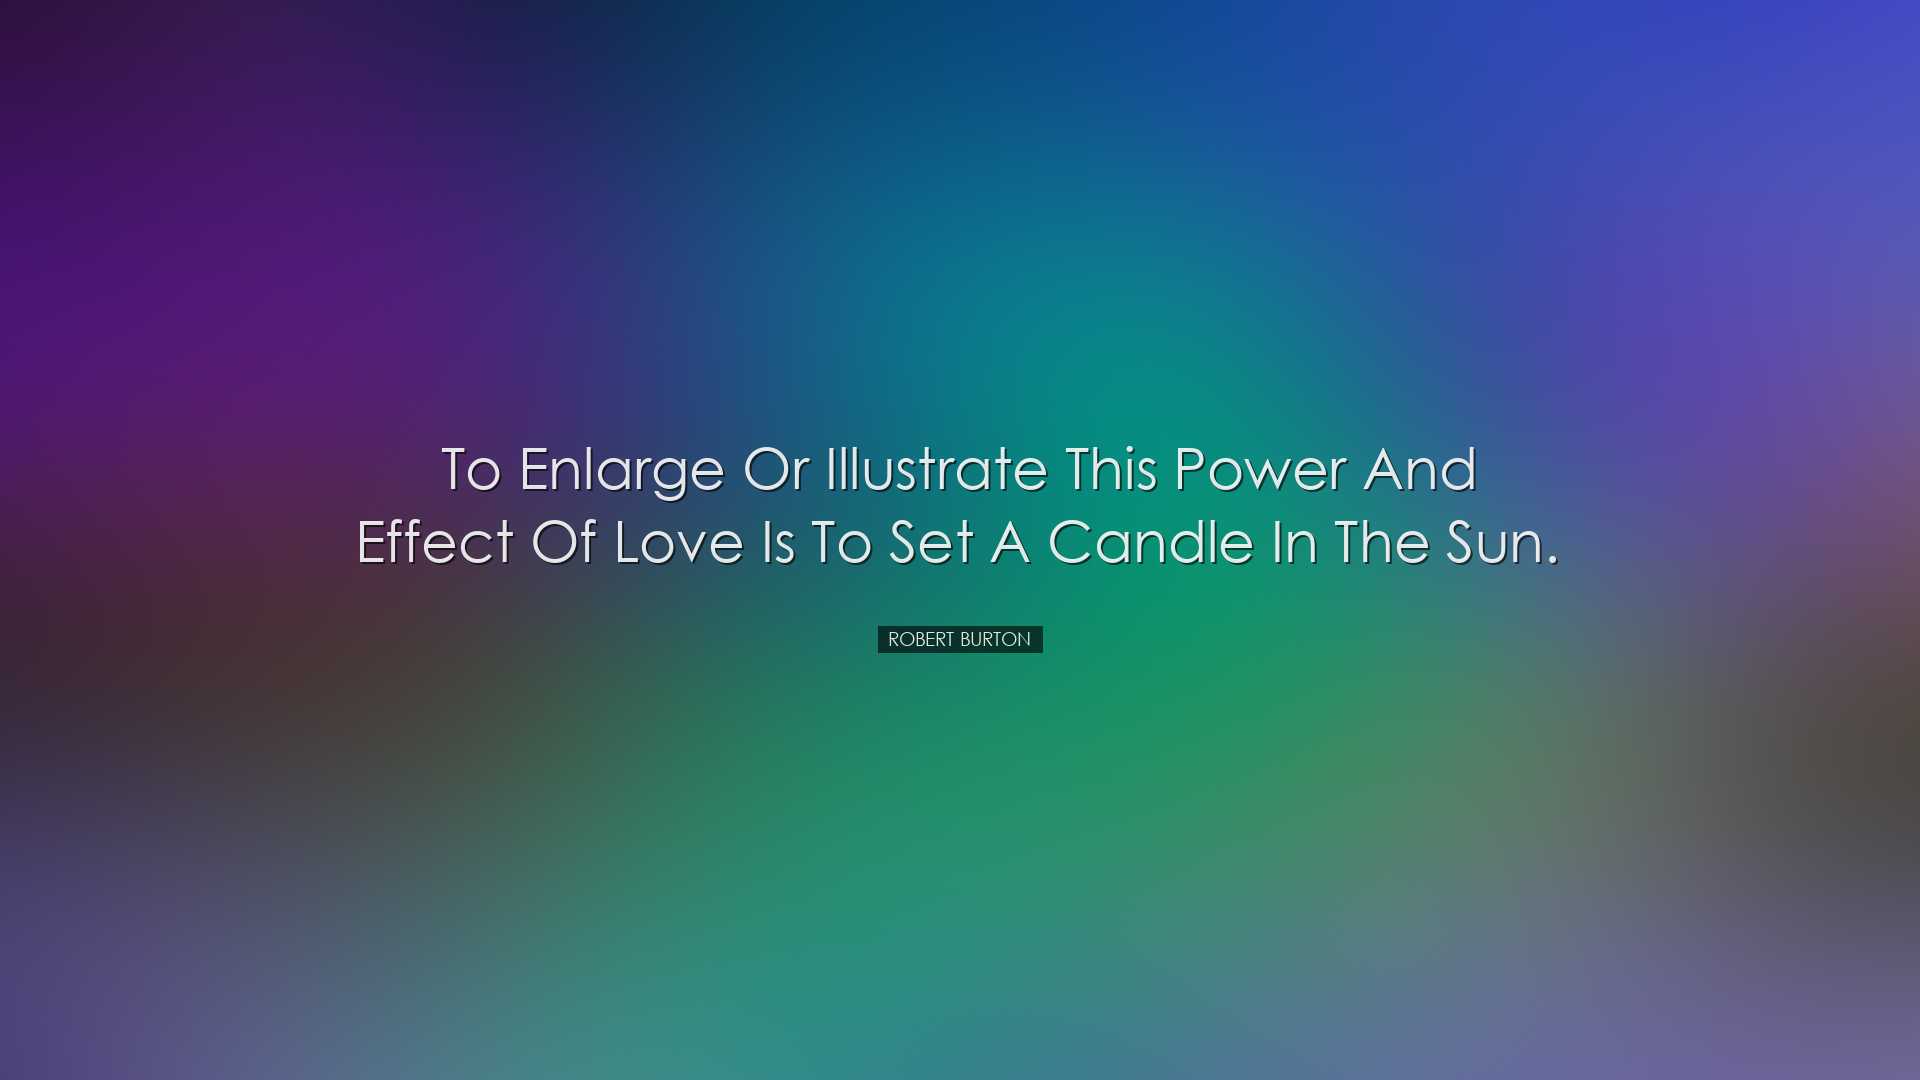 To enlarge or illustrate this power and effect of love is to set a